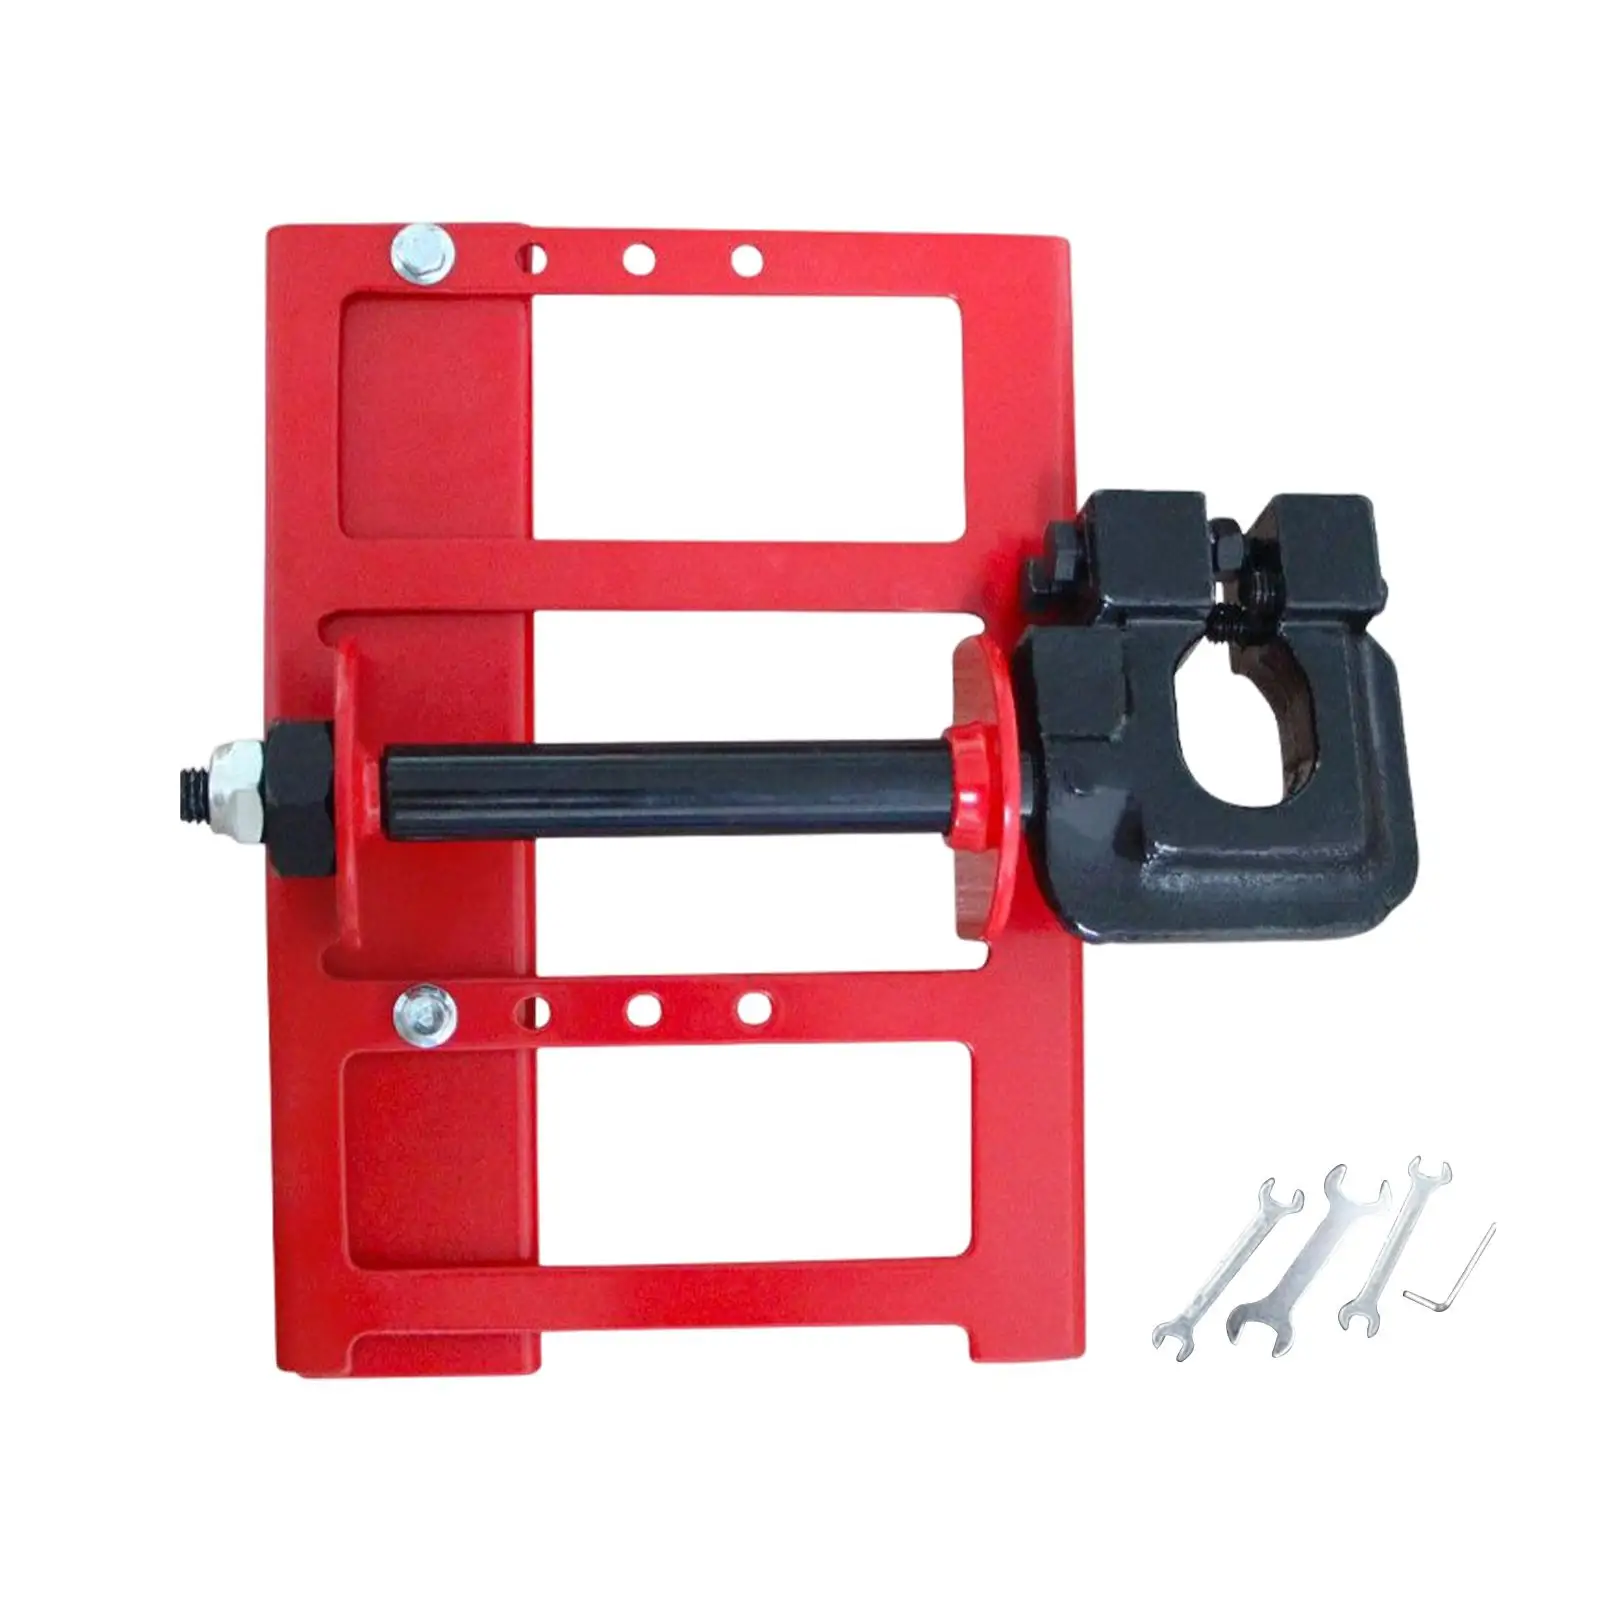 Chainsaw Portable Upgrade Parts Tools Vertical Chainsaw Attachment  Guide Chainsaw Mill for Builders Construction Workers